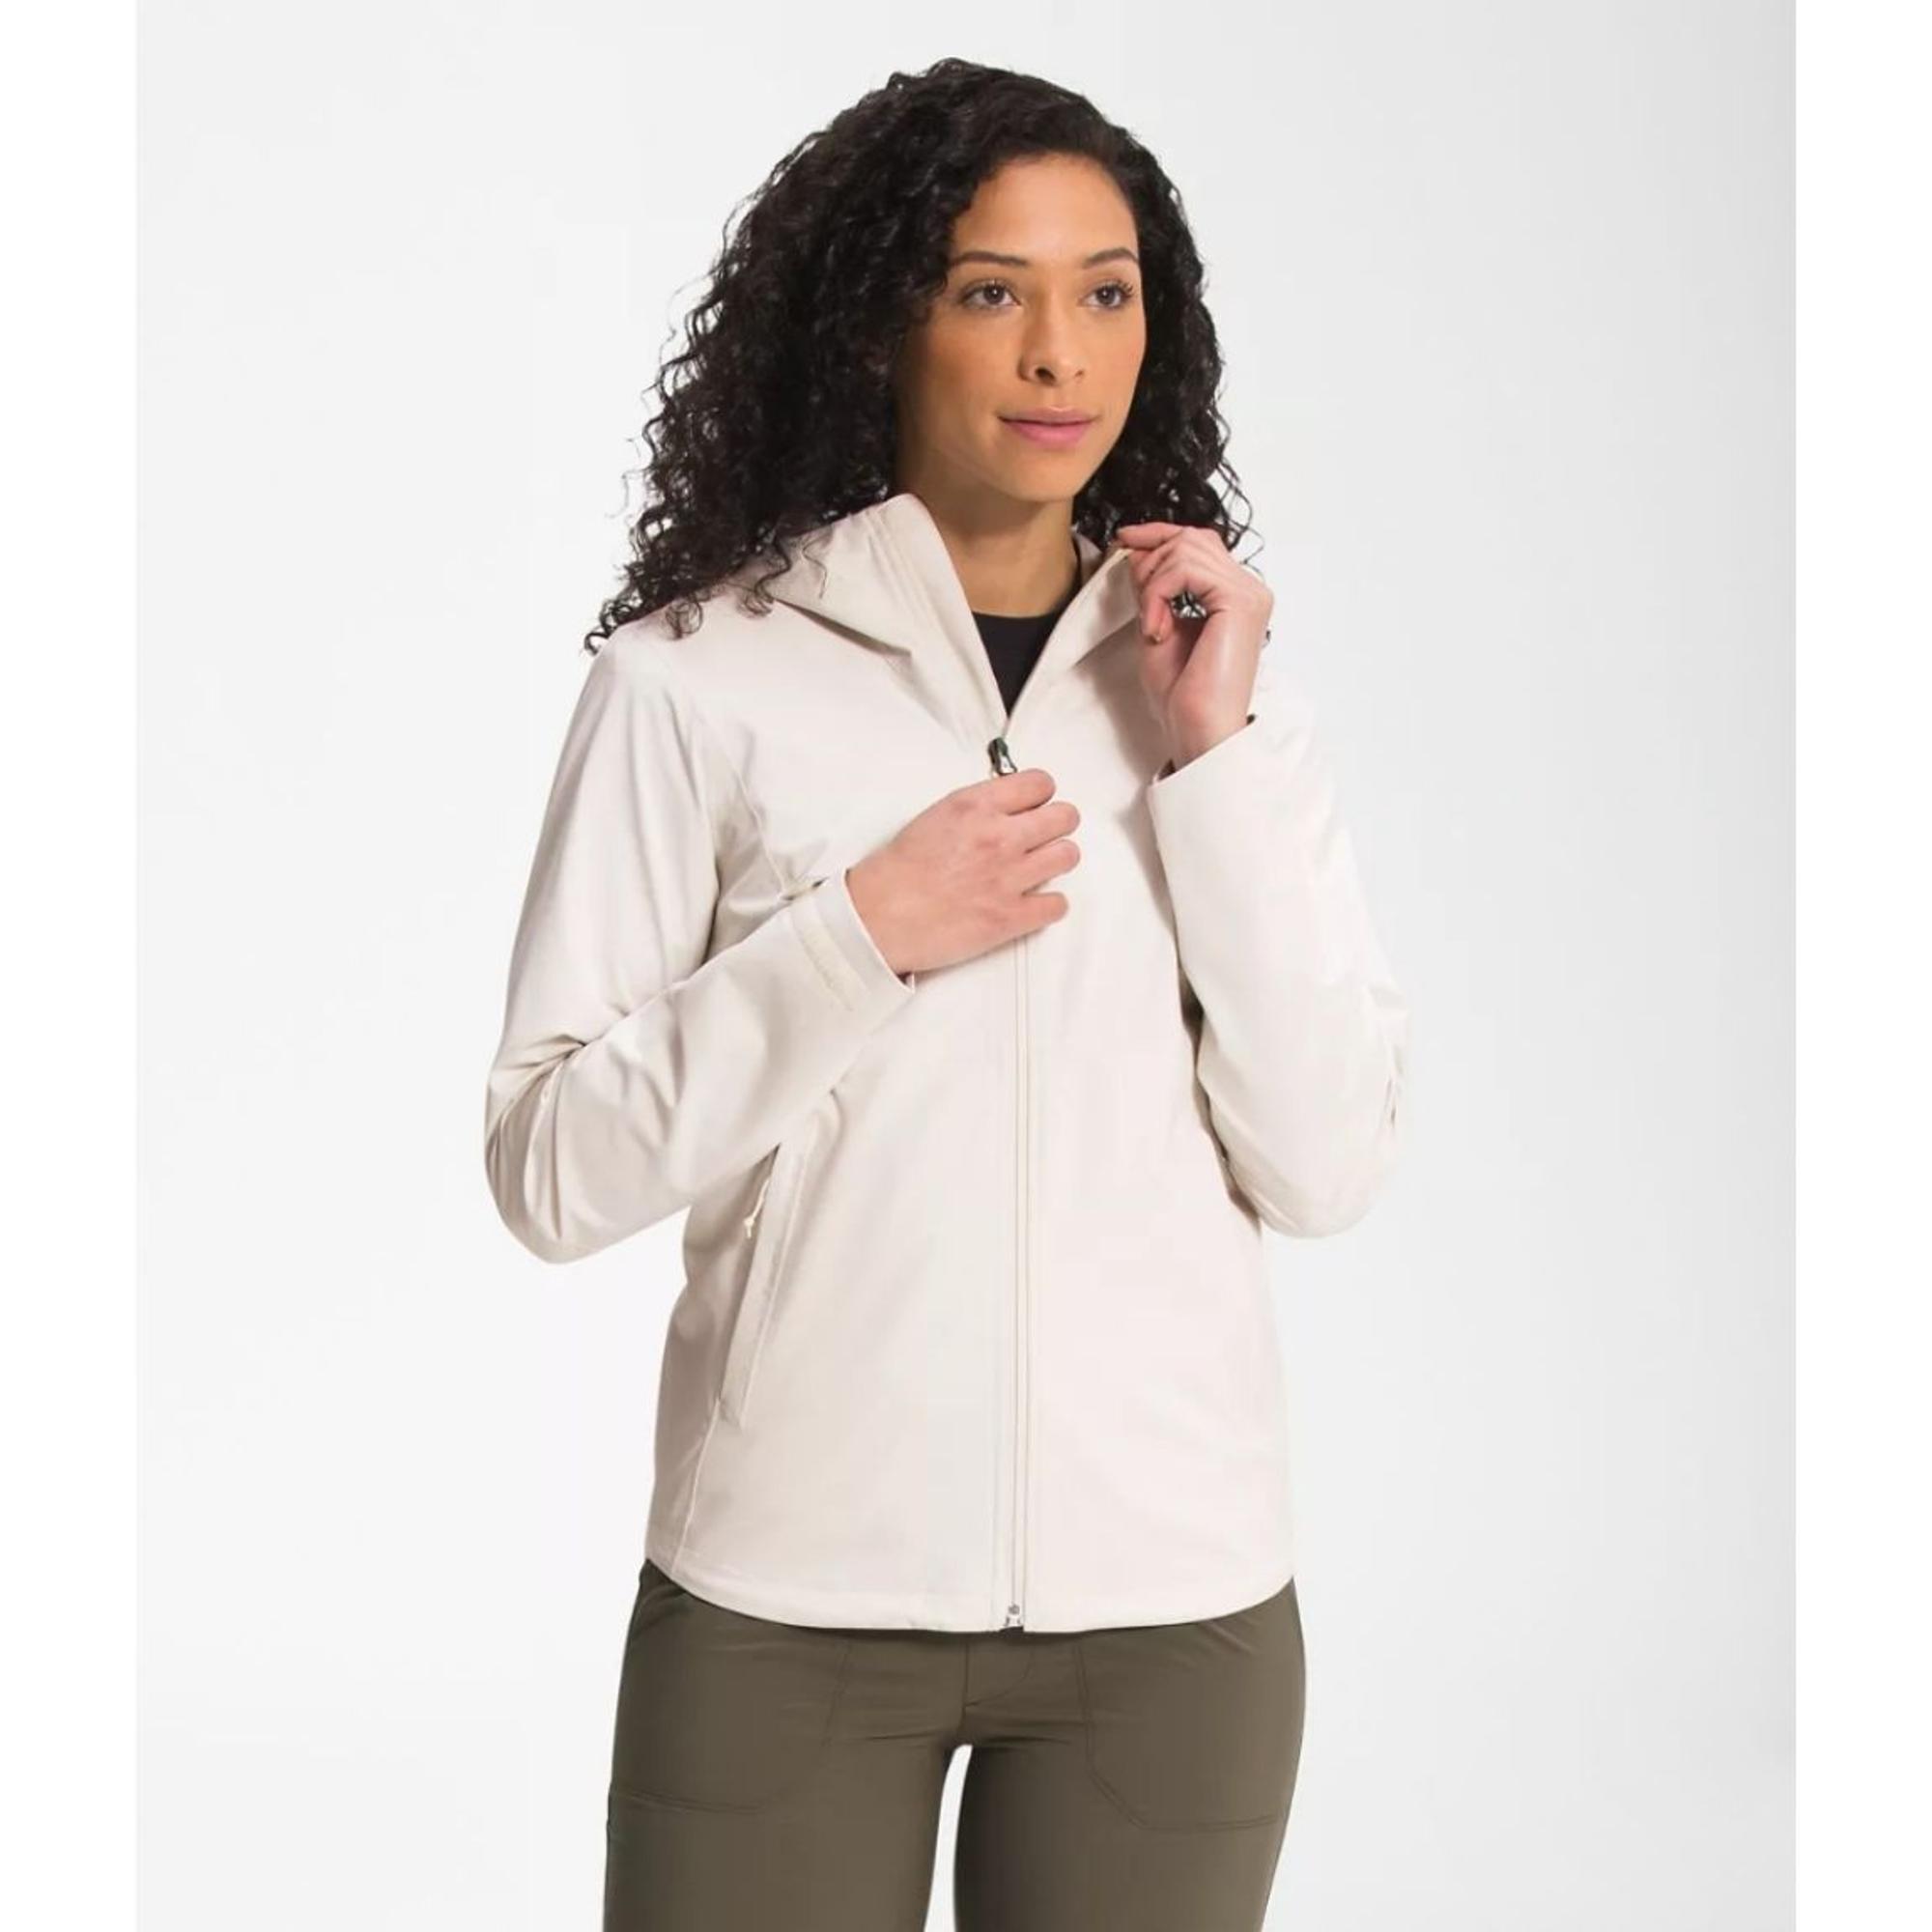 Wormen's Allproof Stretch Jacket